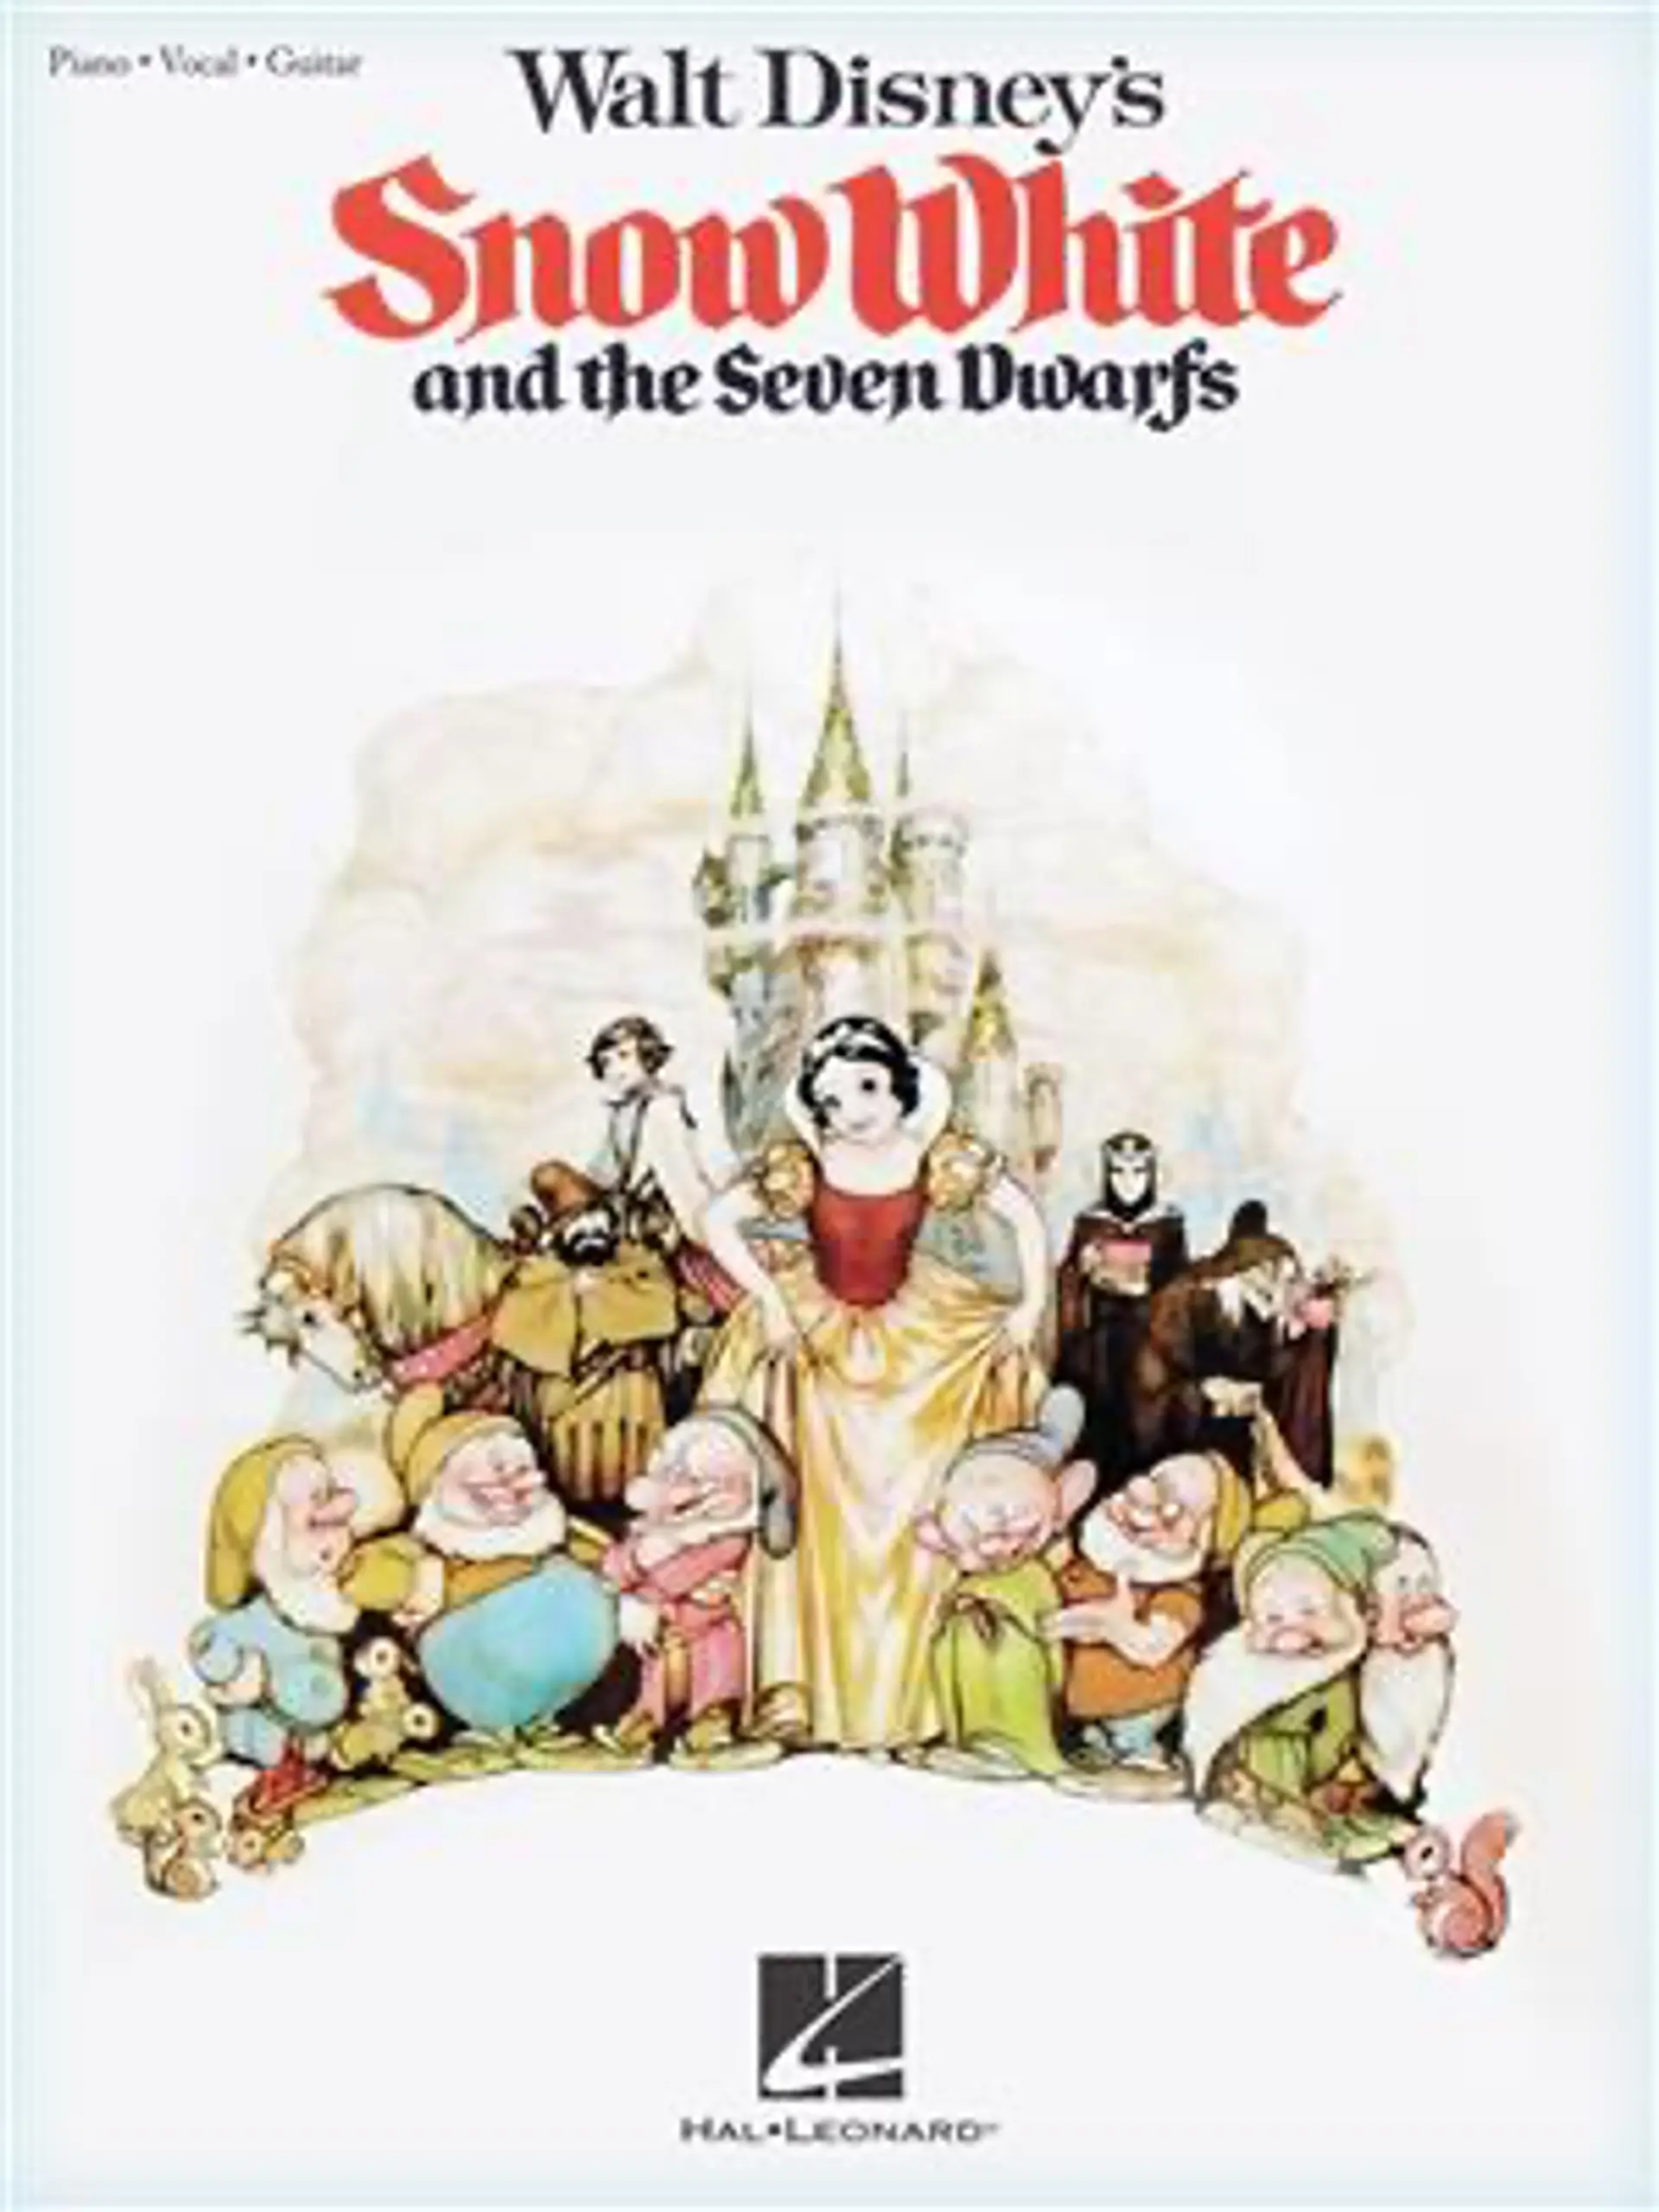 Snow White And The Seven Dwarfs (1937) | Source: Music Shop Europe